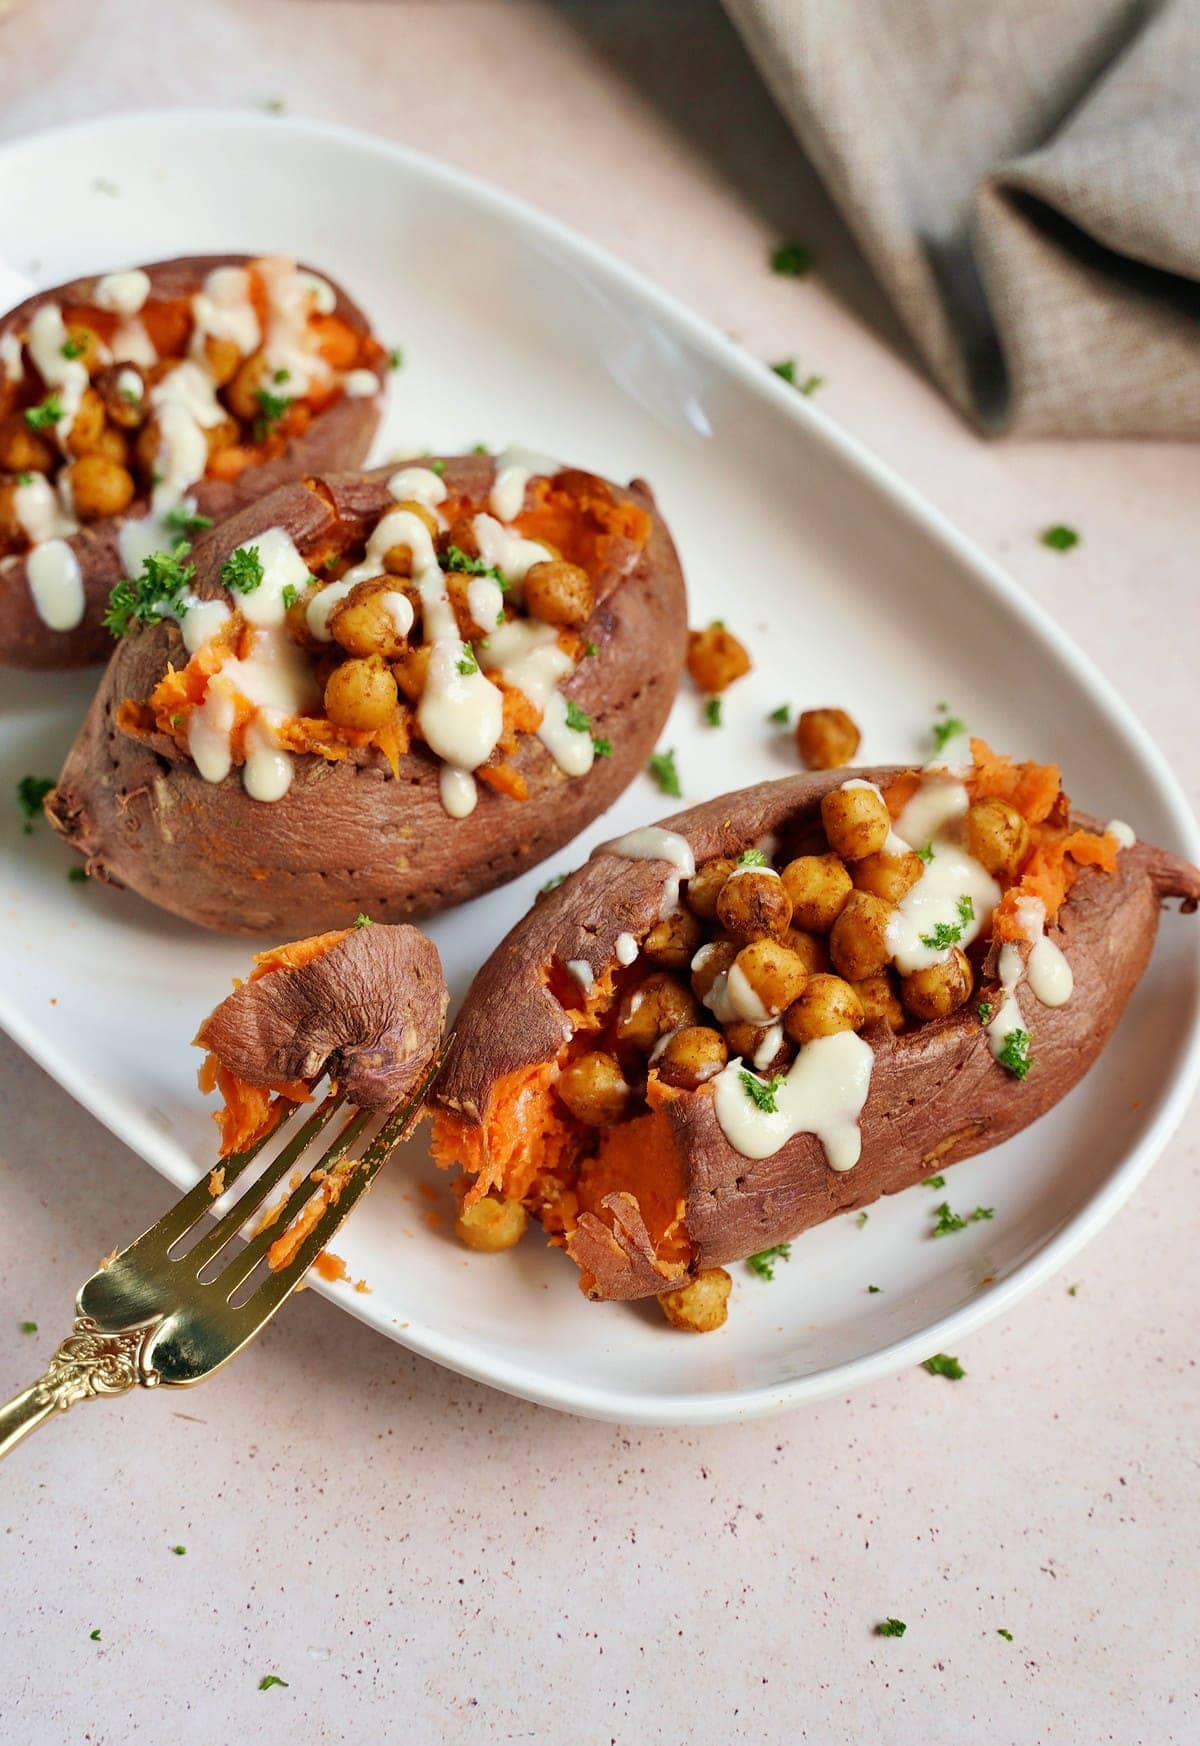 eating a baked sweet potato with roasted chickpeas and white sauce